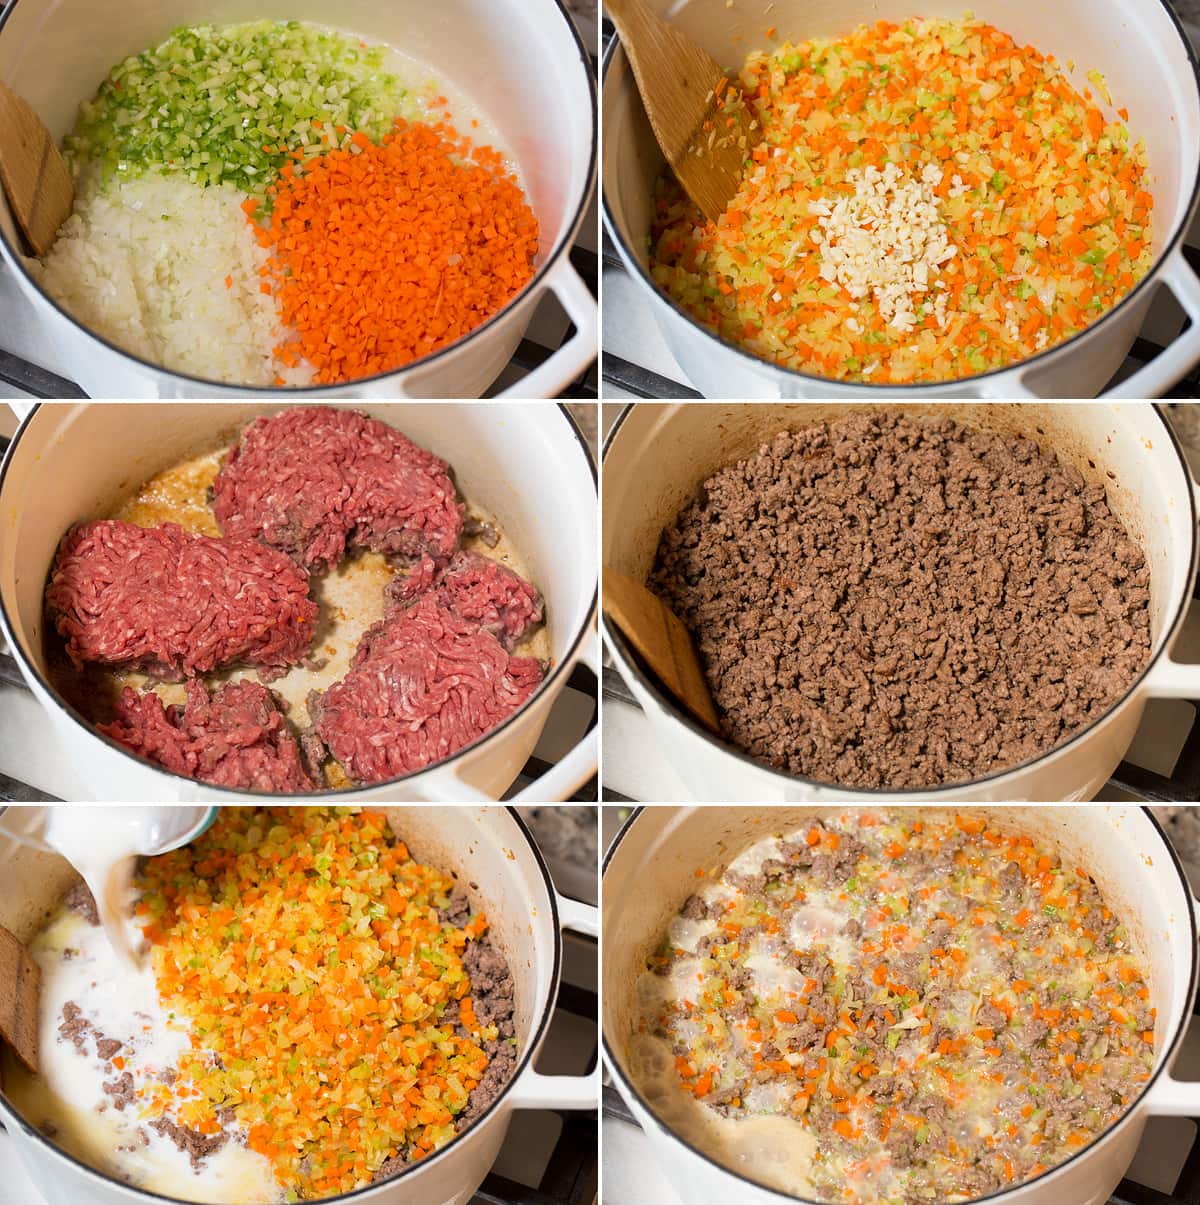 Collage of six photos showing steps of making bolognese sauce.